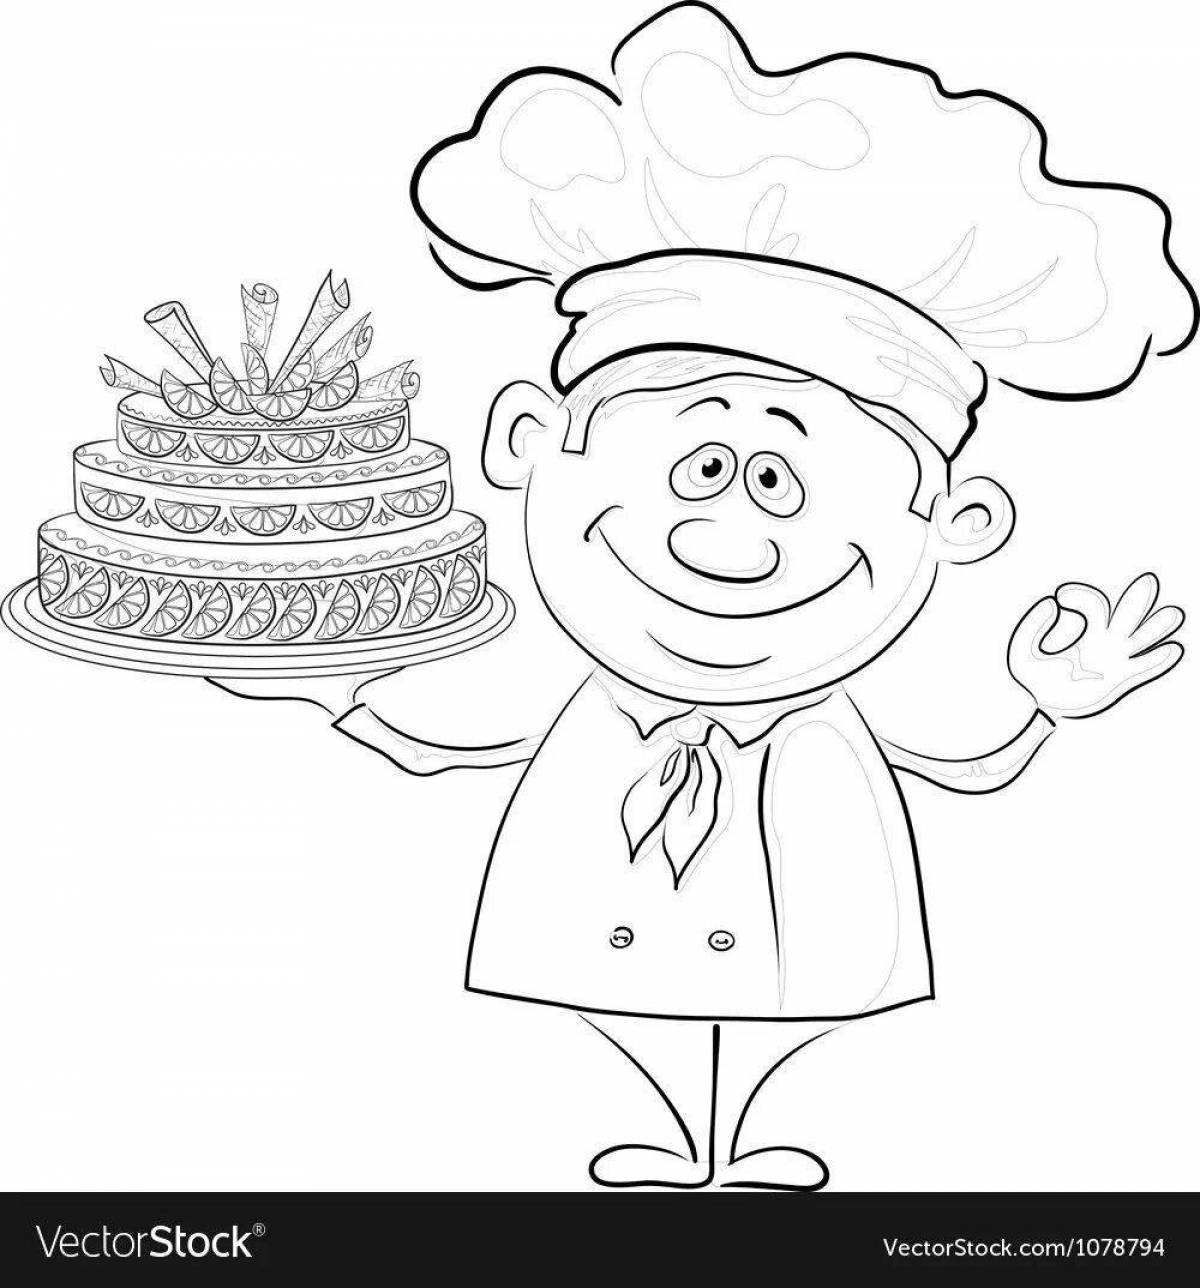 Colorful pastry chef coloring page